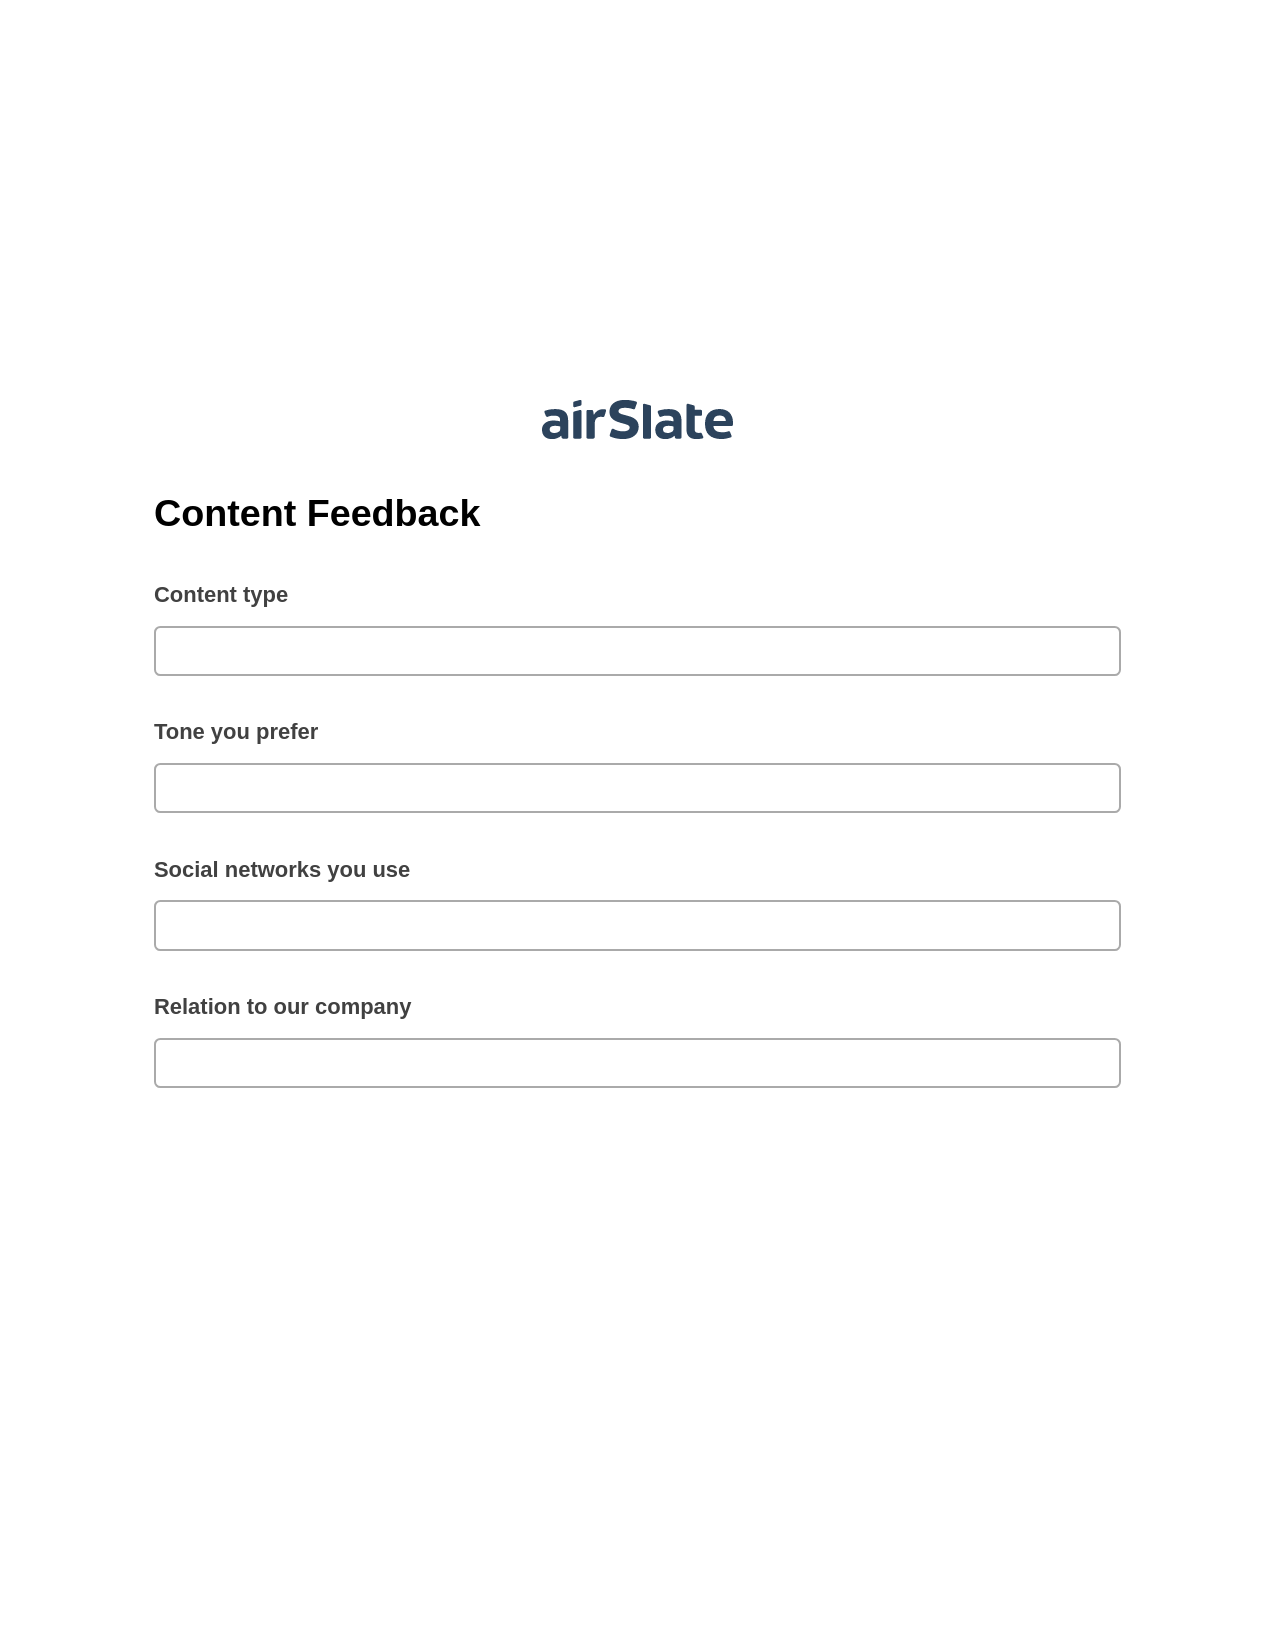 Multirole Content Feedback Pre-fill from another Slate Bot, Jira Bot, OneDrive Bot